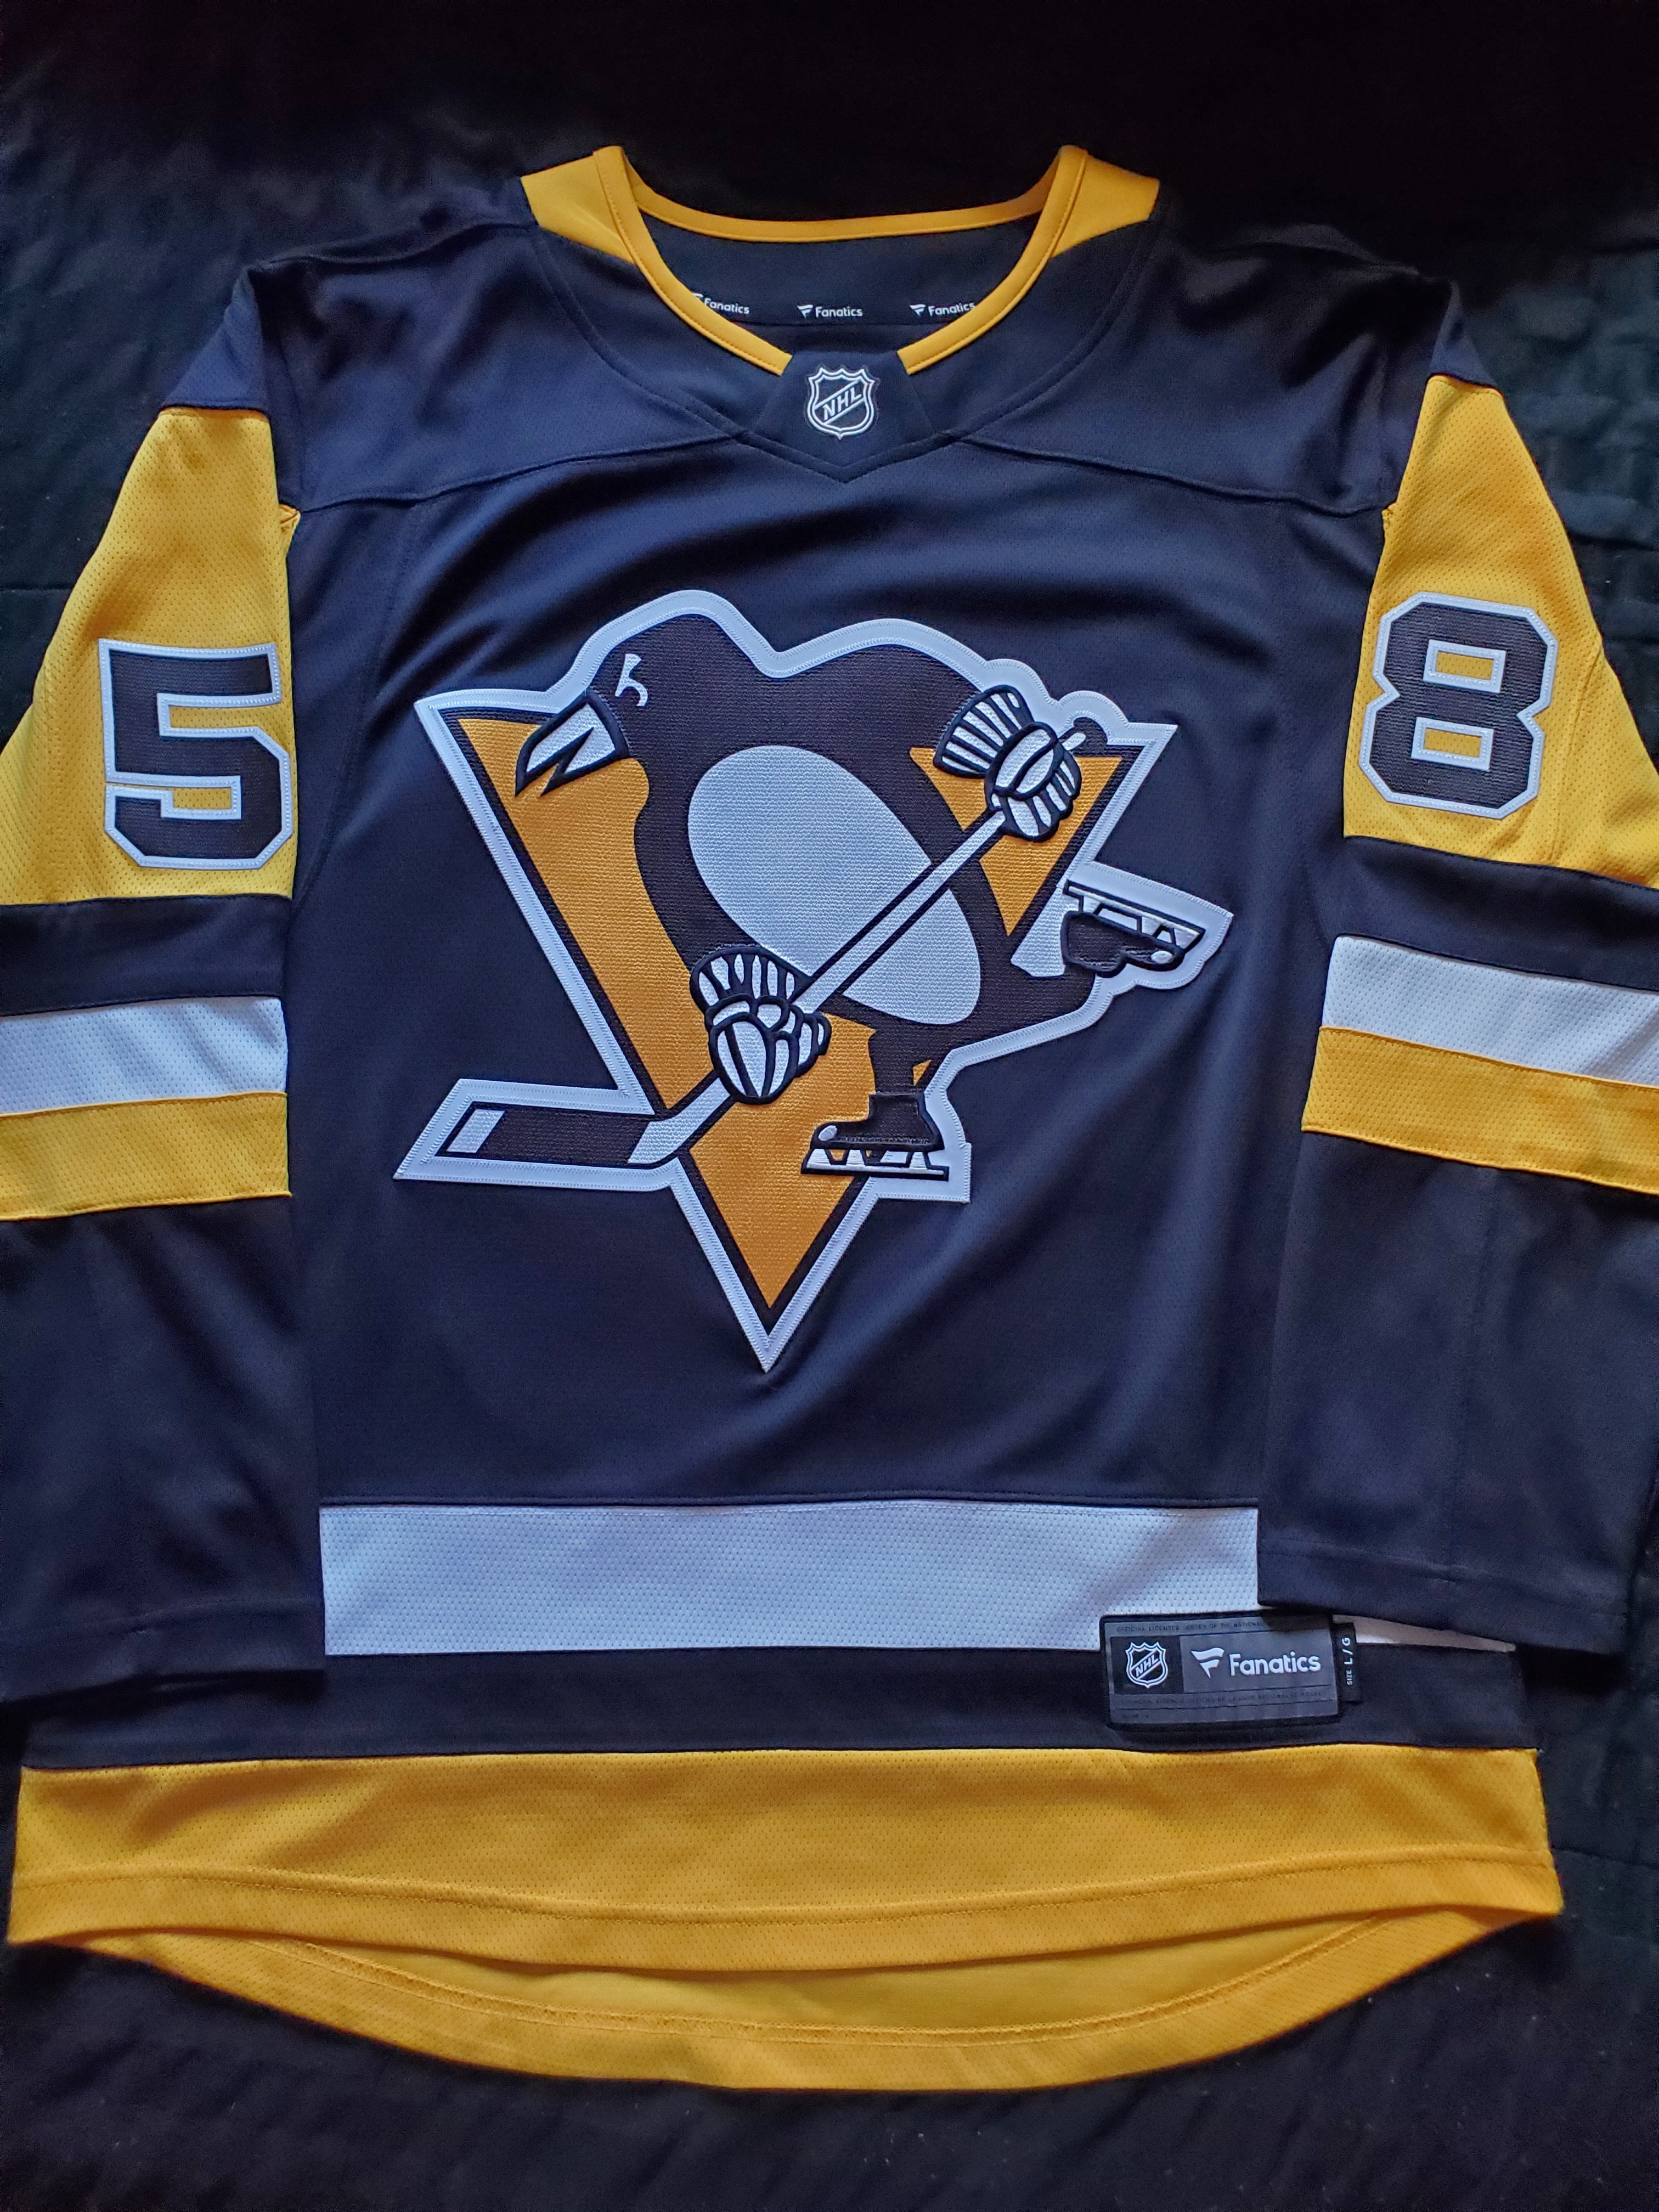 NWT-XL PITTSBURGH PENGUINS 2011 NHL WINTER CLASSIC LICENSED REEBOK